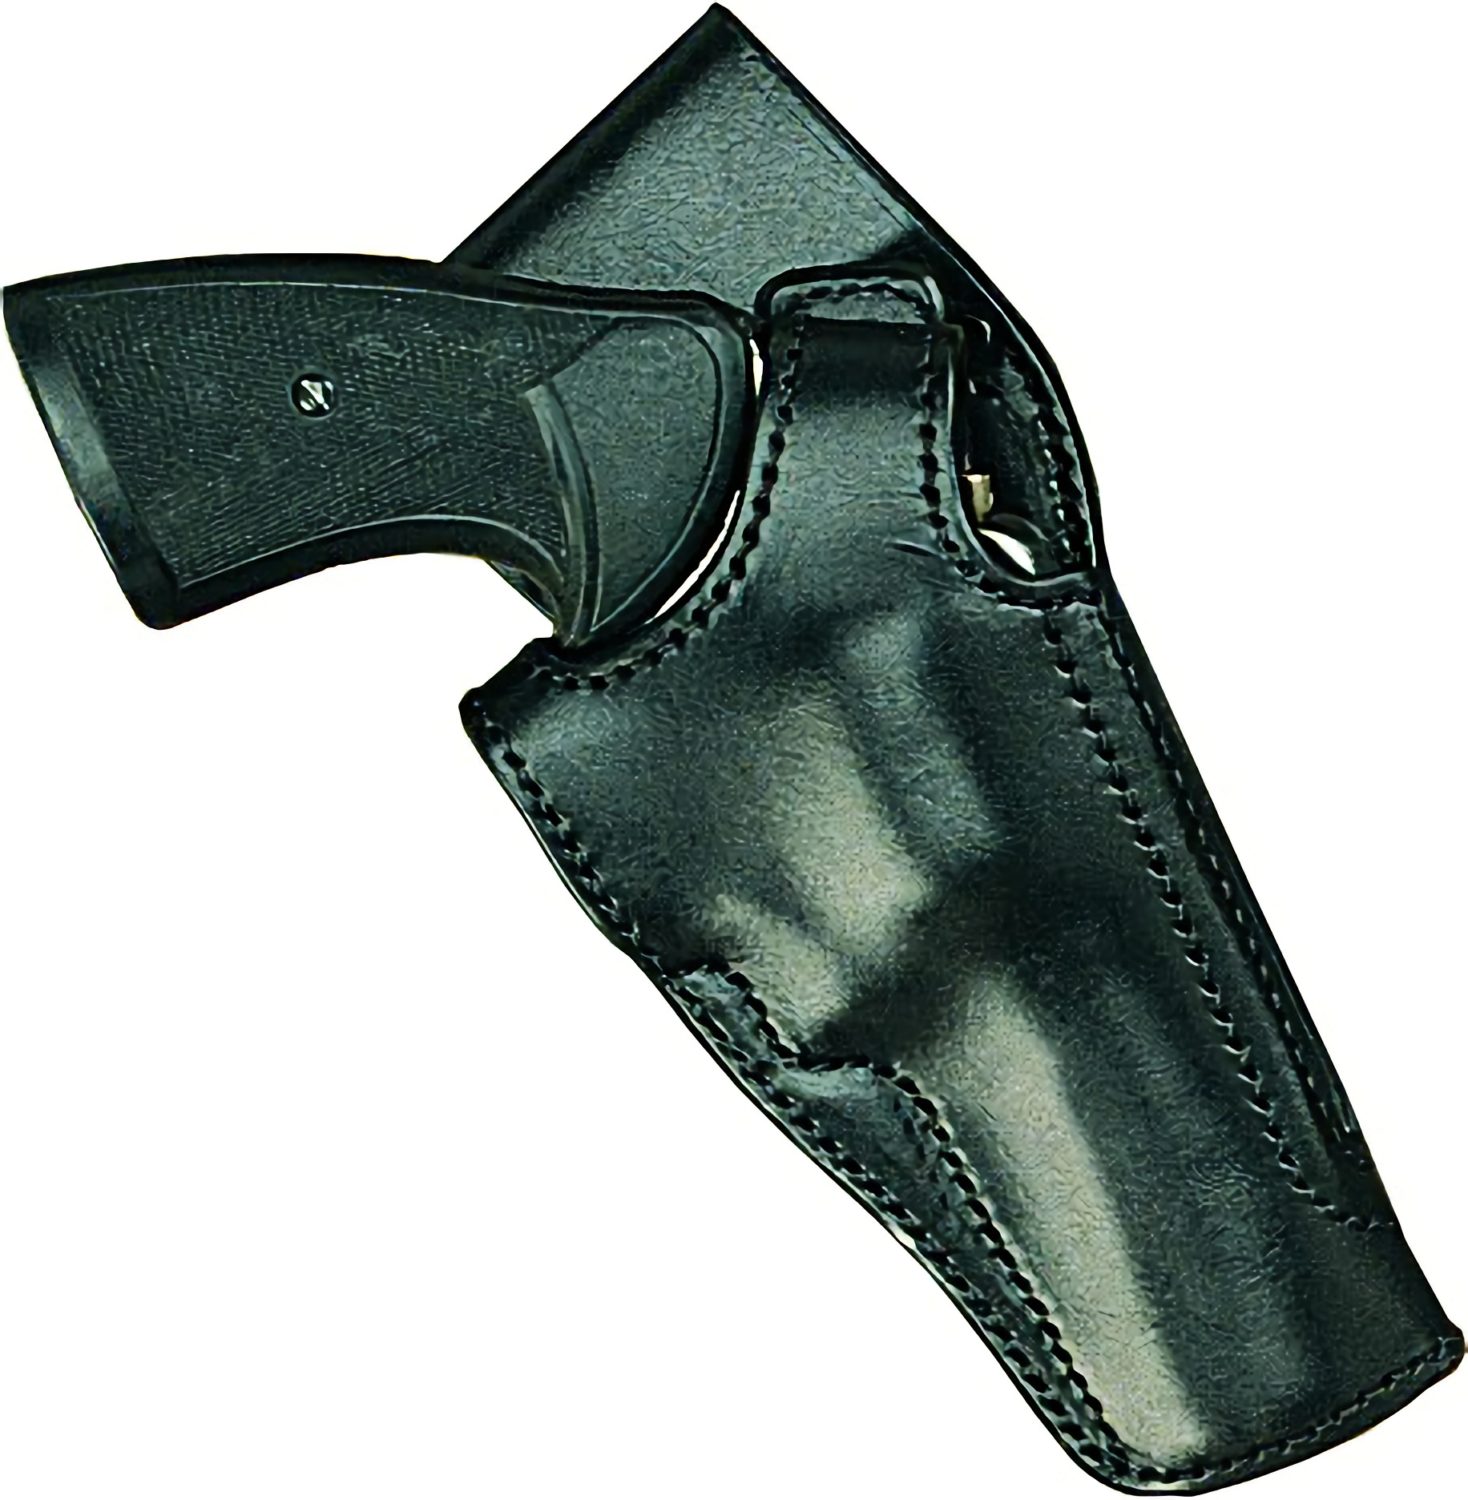  Revolver  Security Holster  Price Western